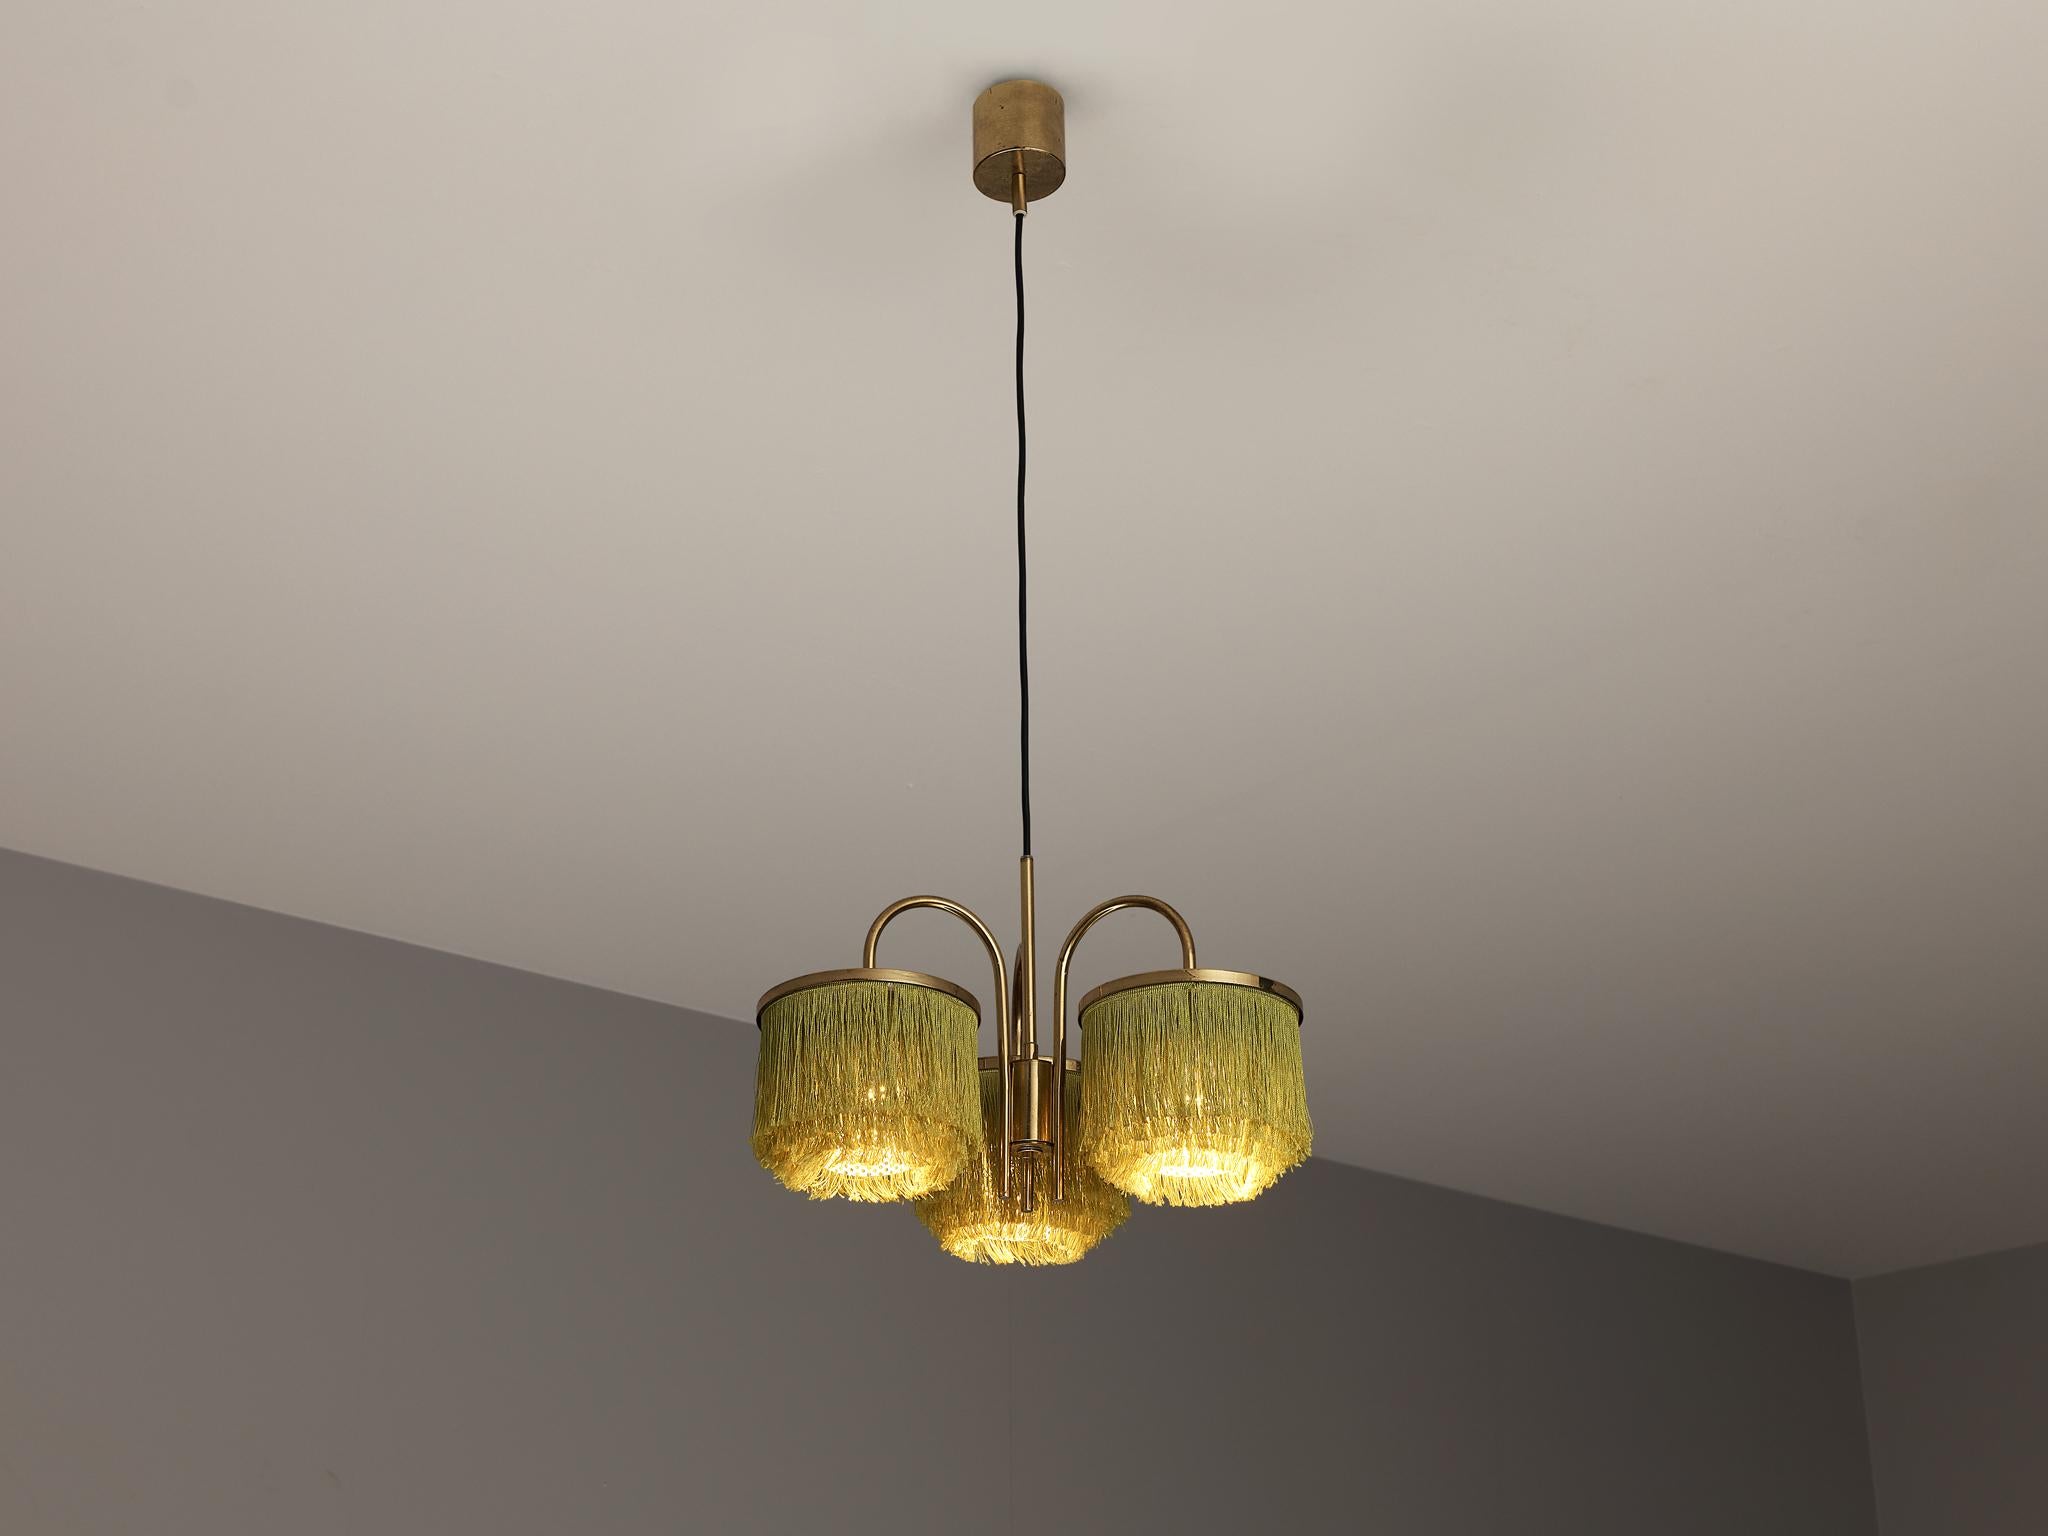 Hans-Agne Jakobsson for Hans-Agne Jakobsson AB in Markaryd, brass, silk string, Europe, 1960s.

This extravagant 'fringe' chandelier is designed by Swedish designer Hans-Agne Jakobsson. Its frame holds three rounded arms with each a round pendant